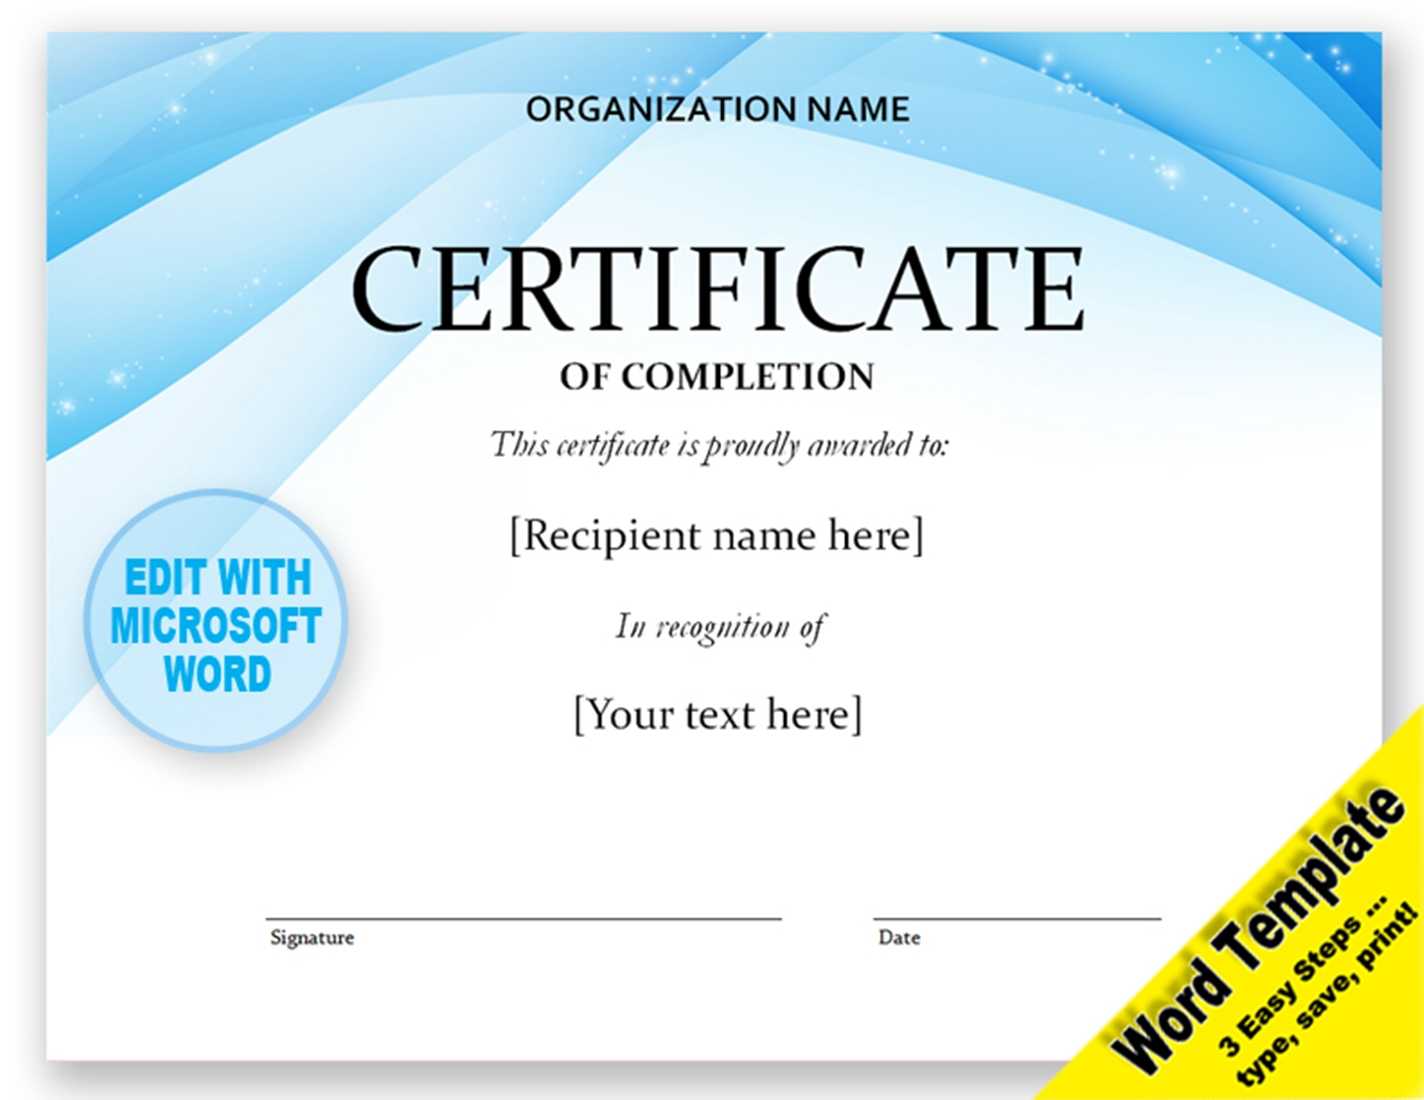 Contemporary Certificate Of Completion Template Digital Download Within Downloadable Certificate Templates For Microsoft Word